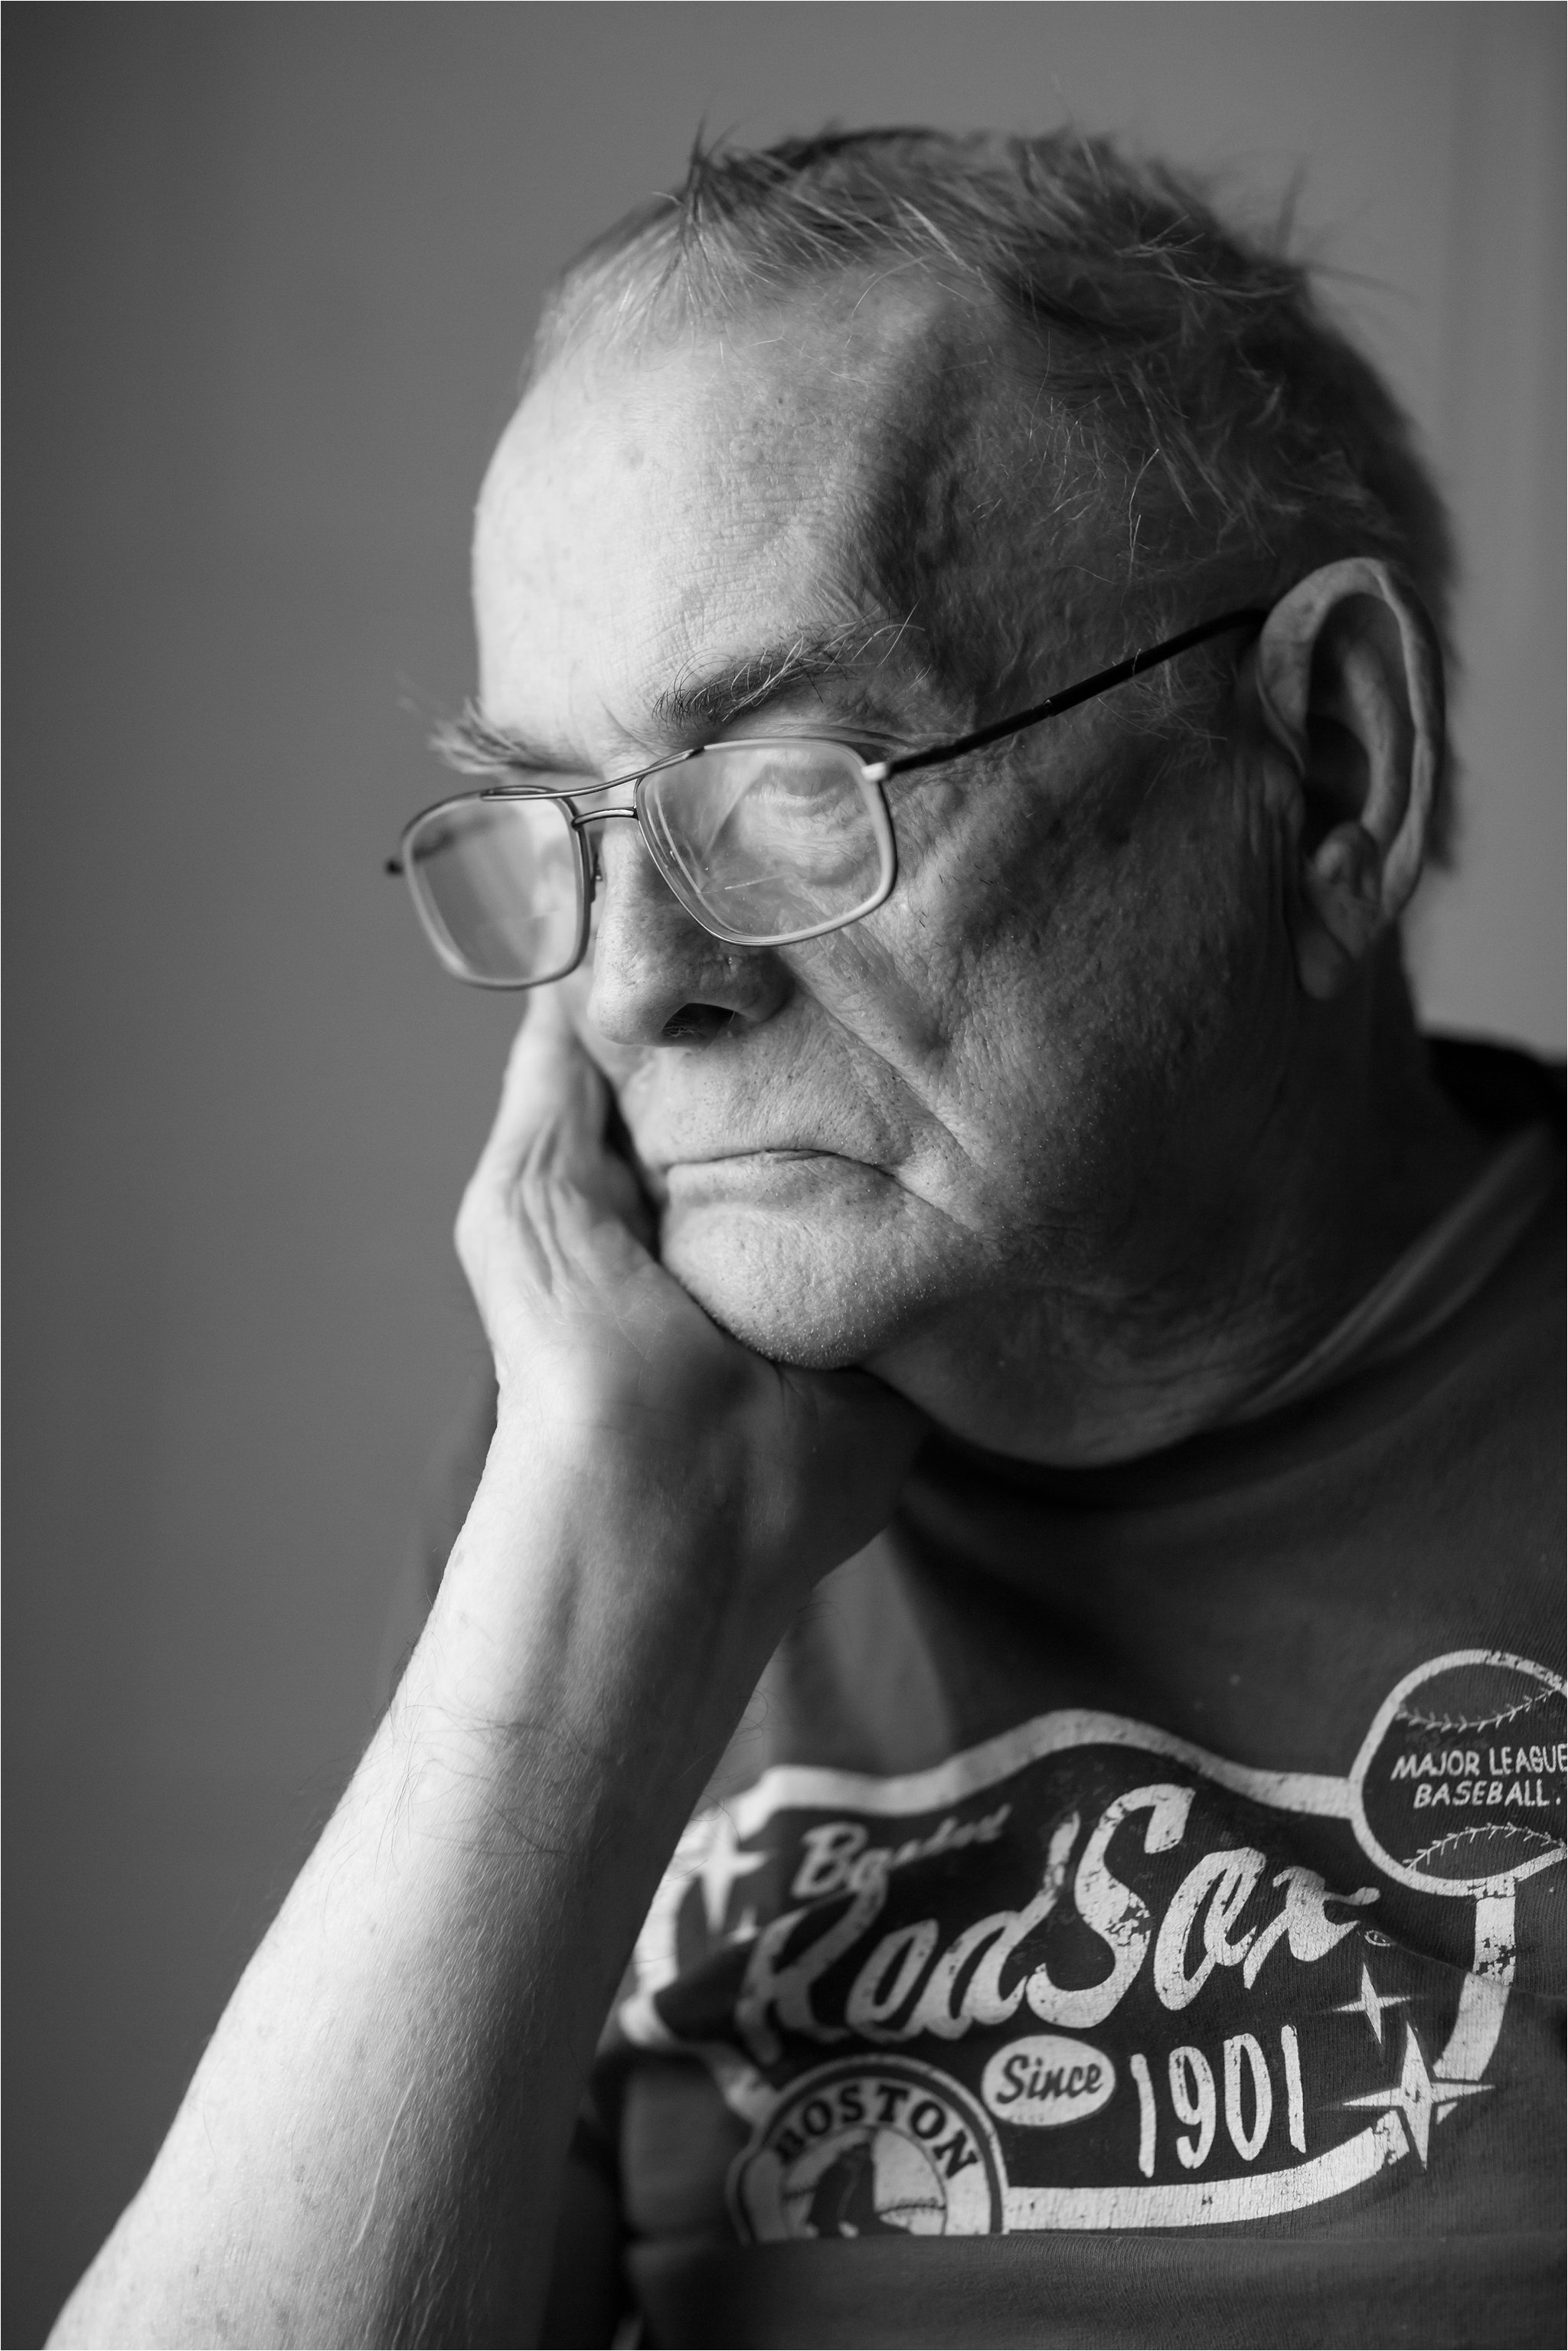 Black and White Portrait of Elderly Man Wearing Red Sox Shirt